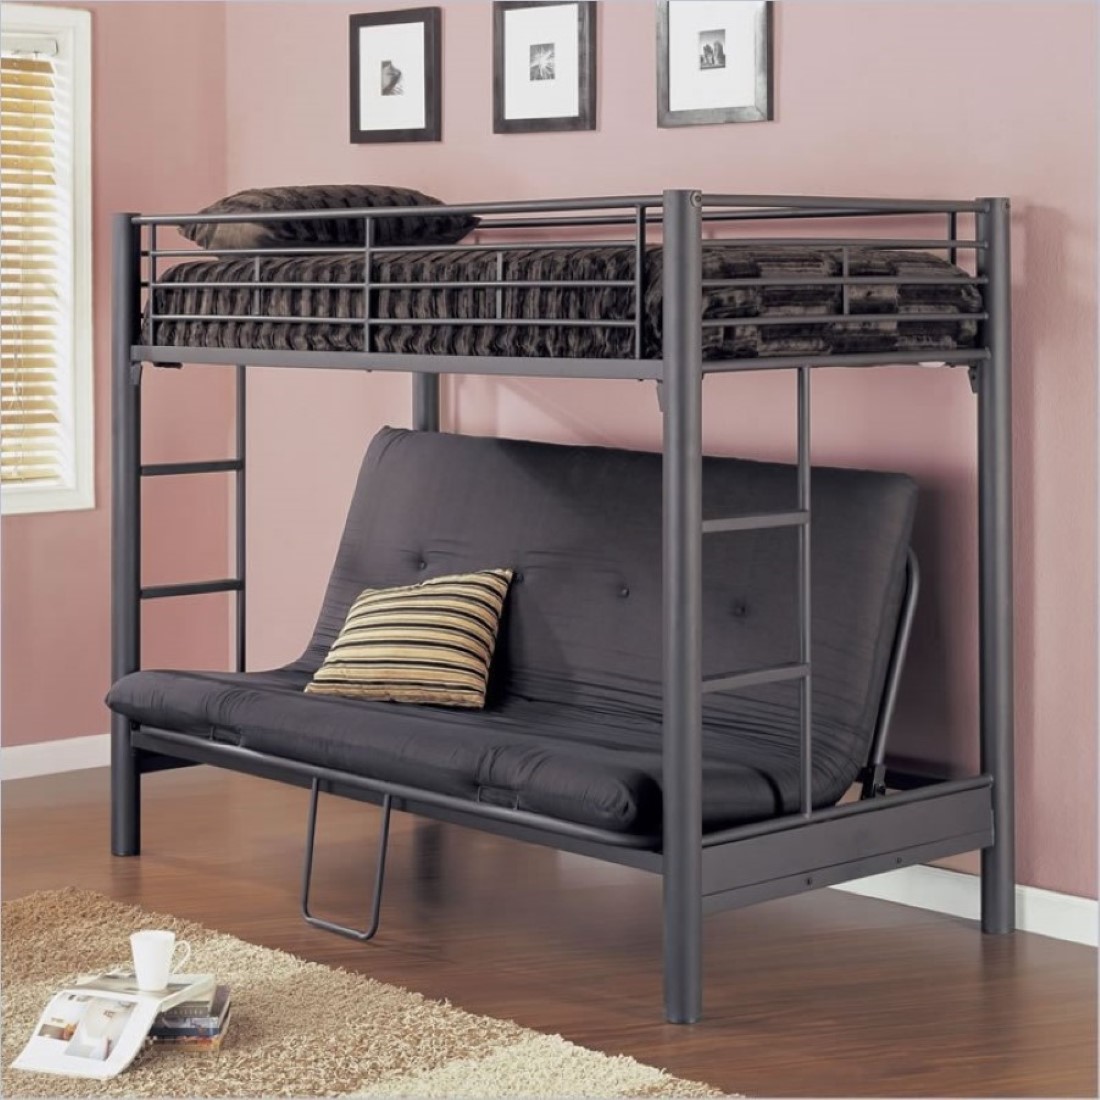 Metal Twin With Cool Metal Twin Loft Bed With Futon And Stripes Throw Pillow Feat Modern Bedroom Area Rug Design Idea Kids Room 30 Functional Twin Loft Bed Design Furniture With Desk For Kids